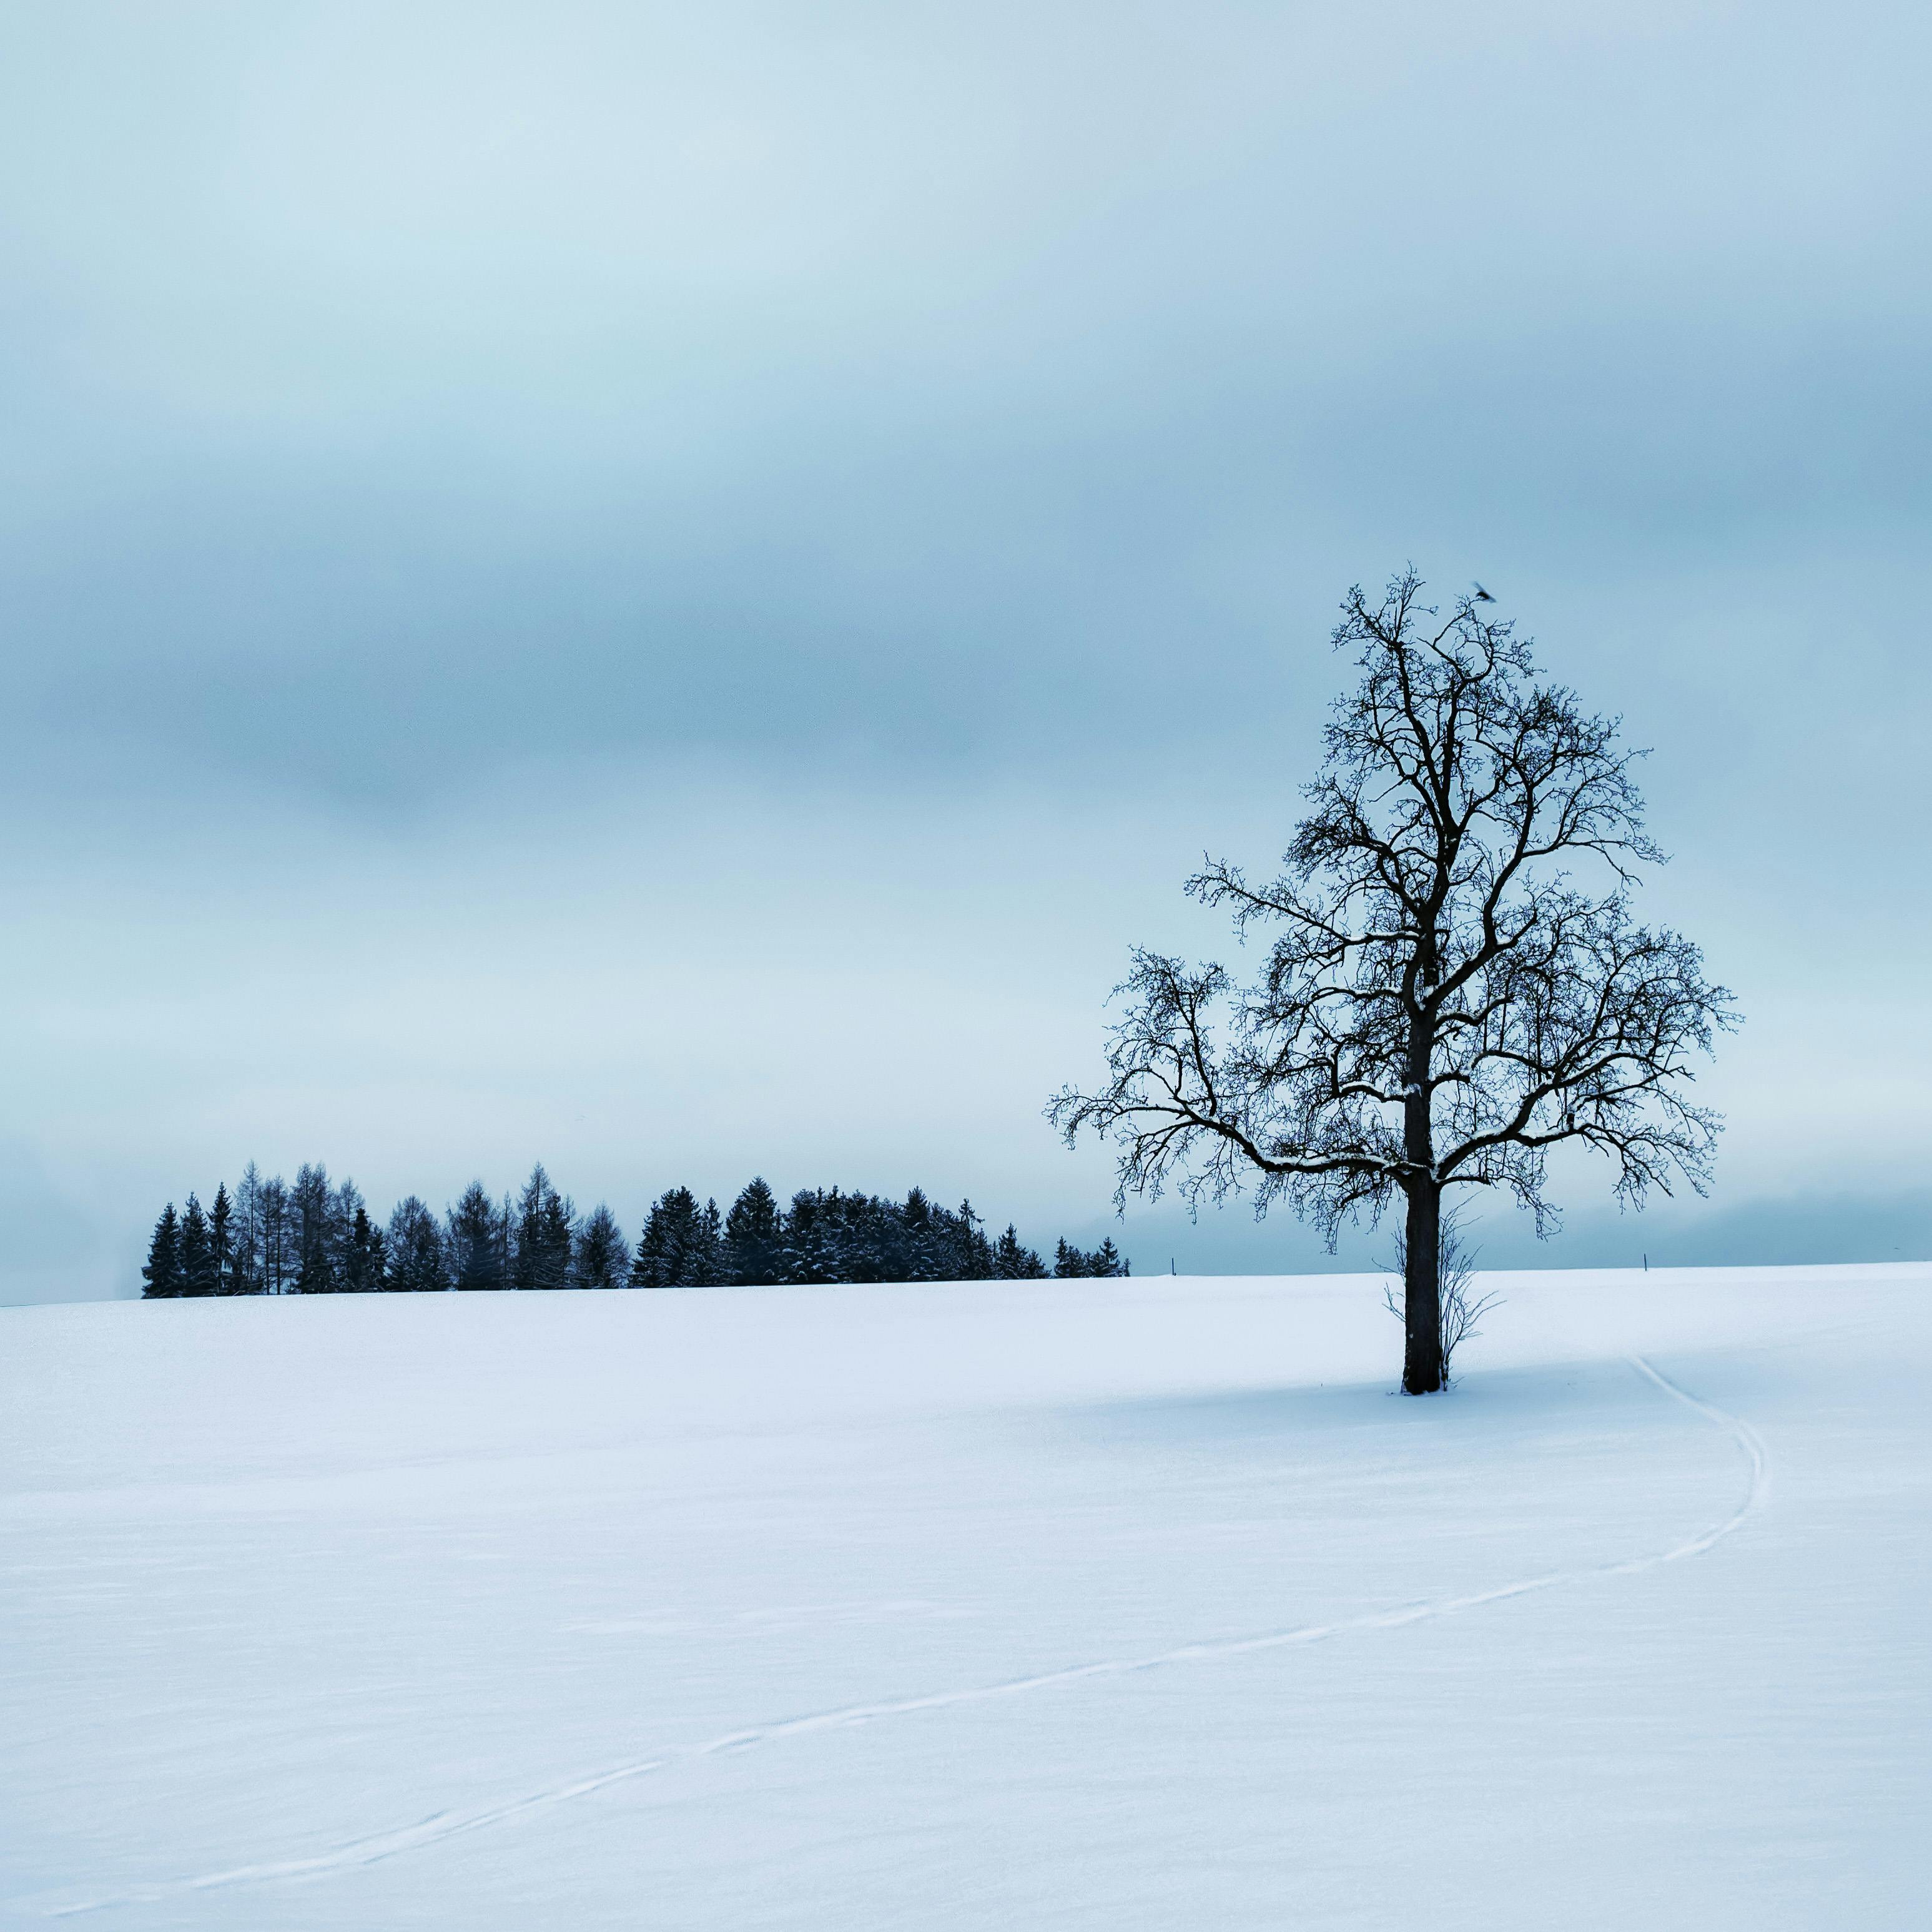 Snow Covered Trees In Winter Landscape by Nikitje